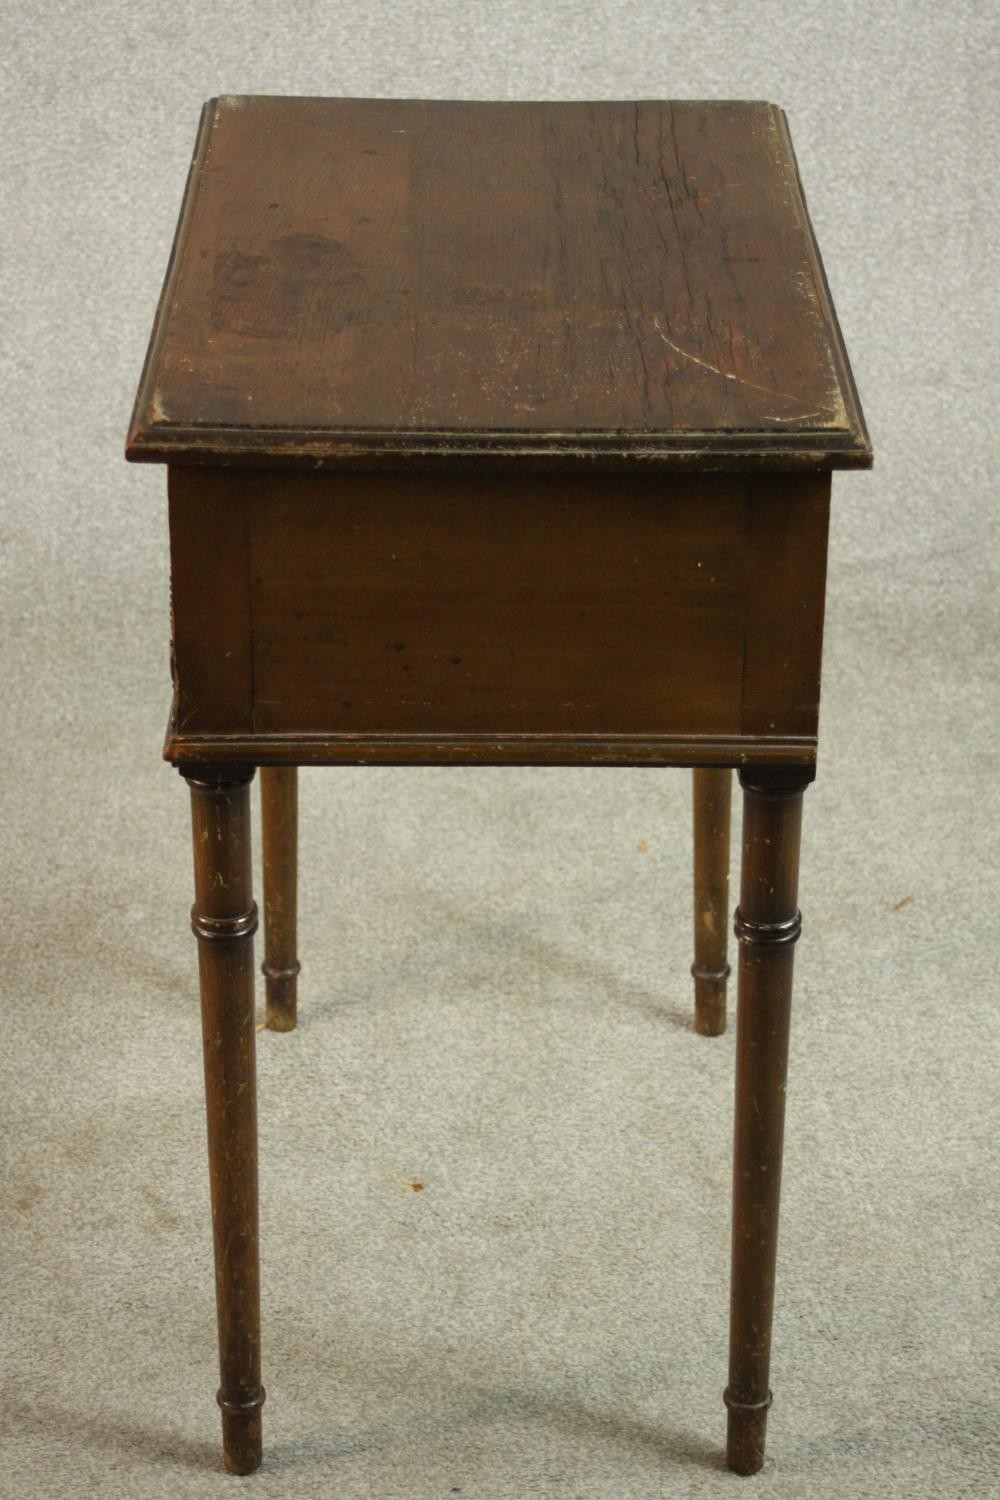 A side table, with a rectangular top over a recess, on turned legs. H.73 W.60 D.40cm. - Image 7 of 7